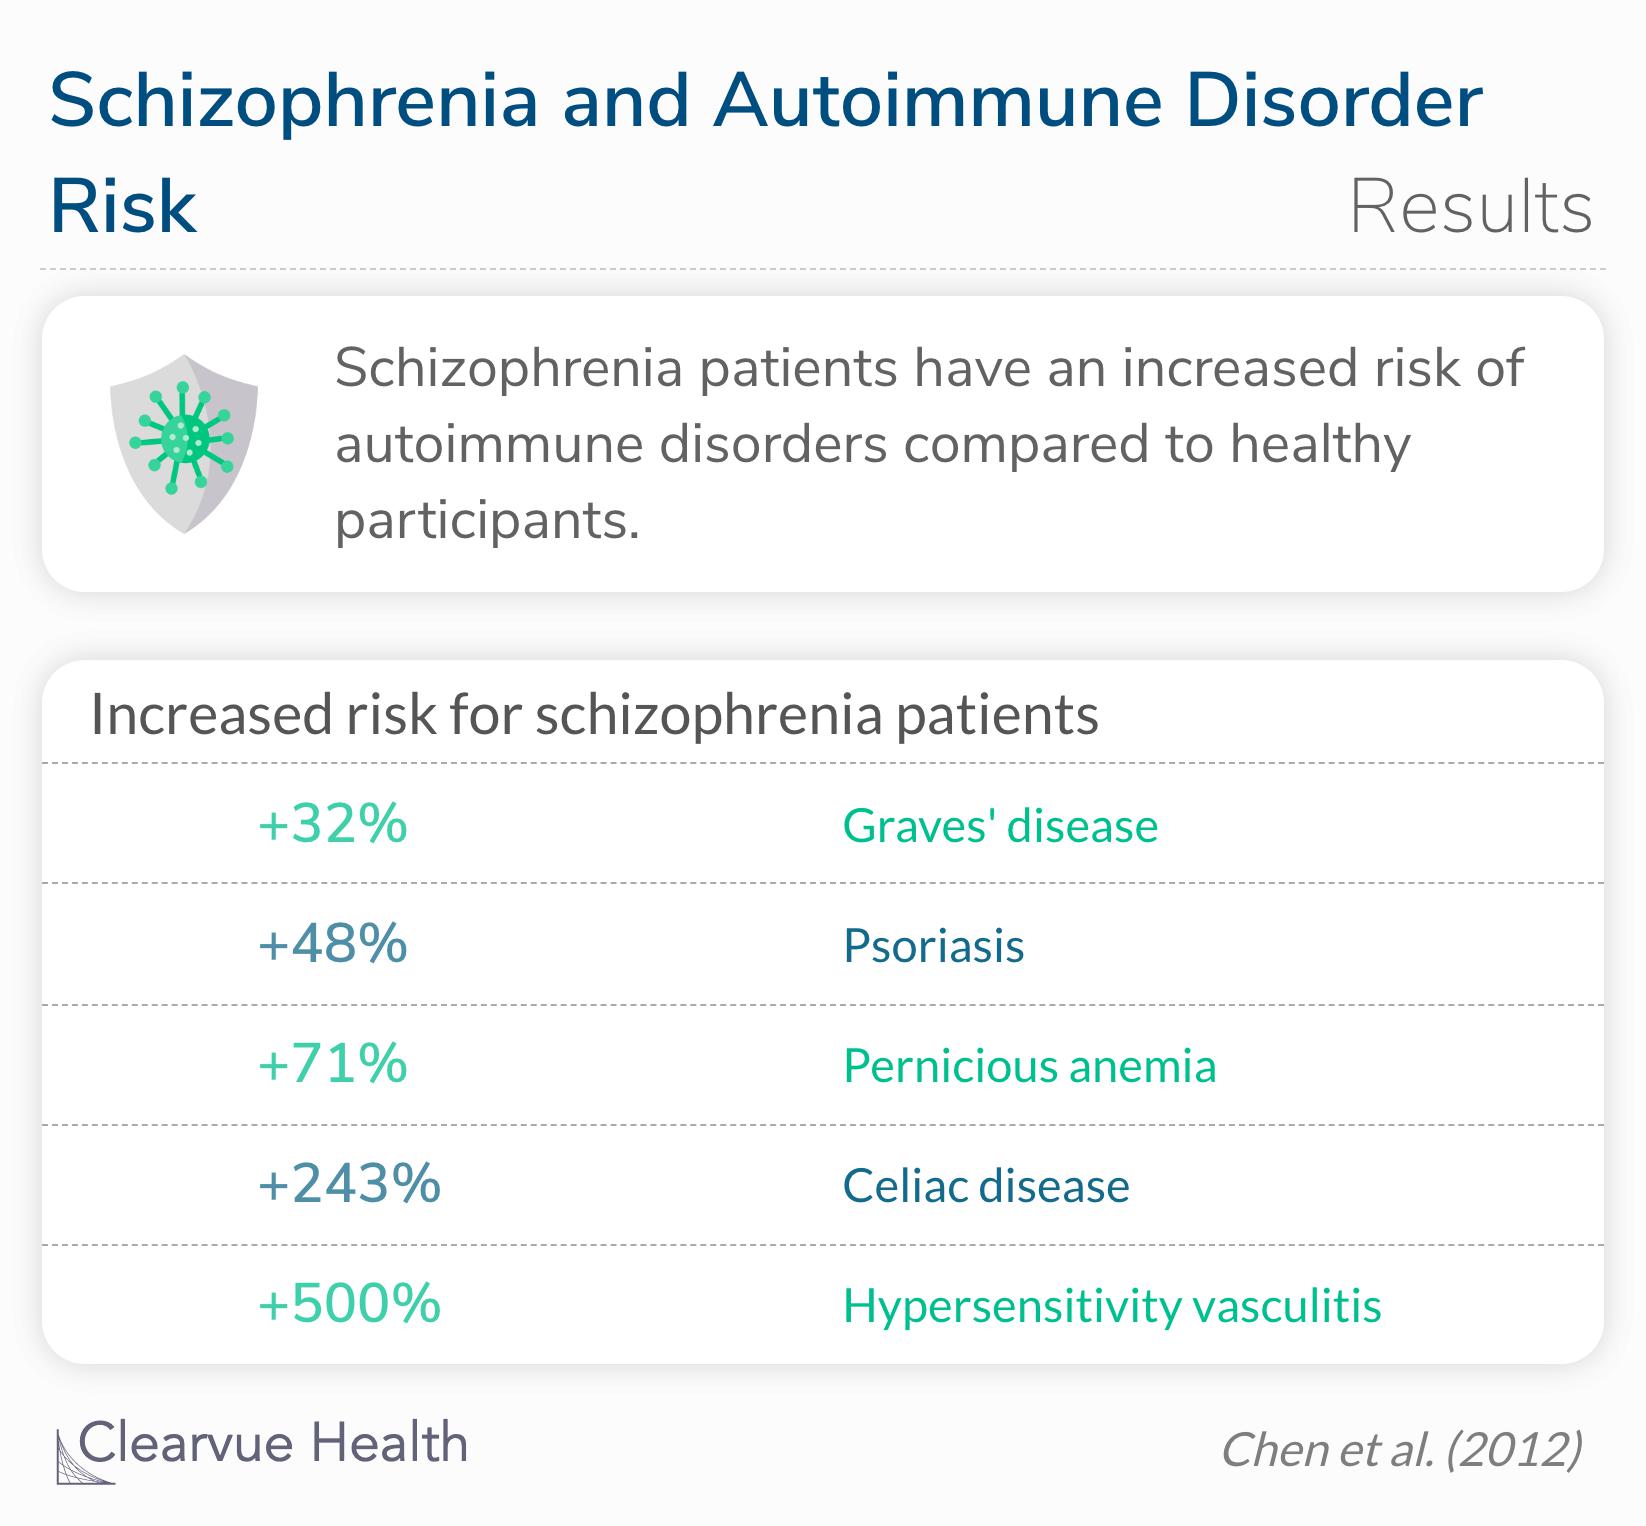 Schizophrenia patients are more likely to develop autoimmune disorders 